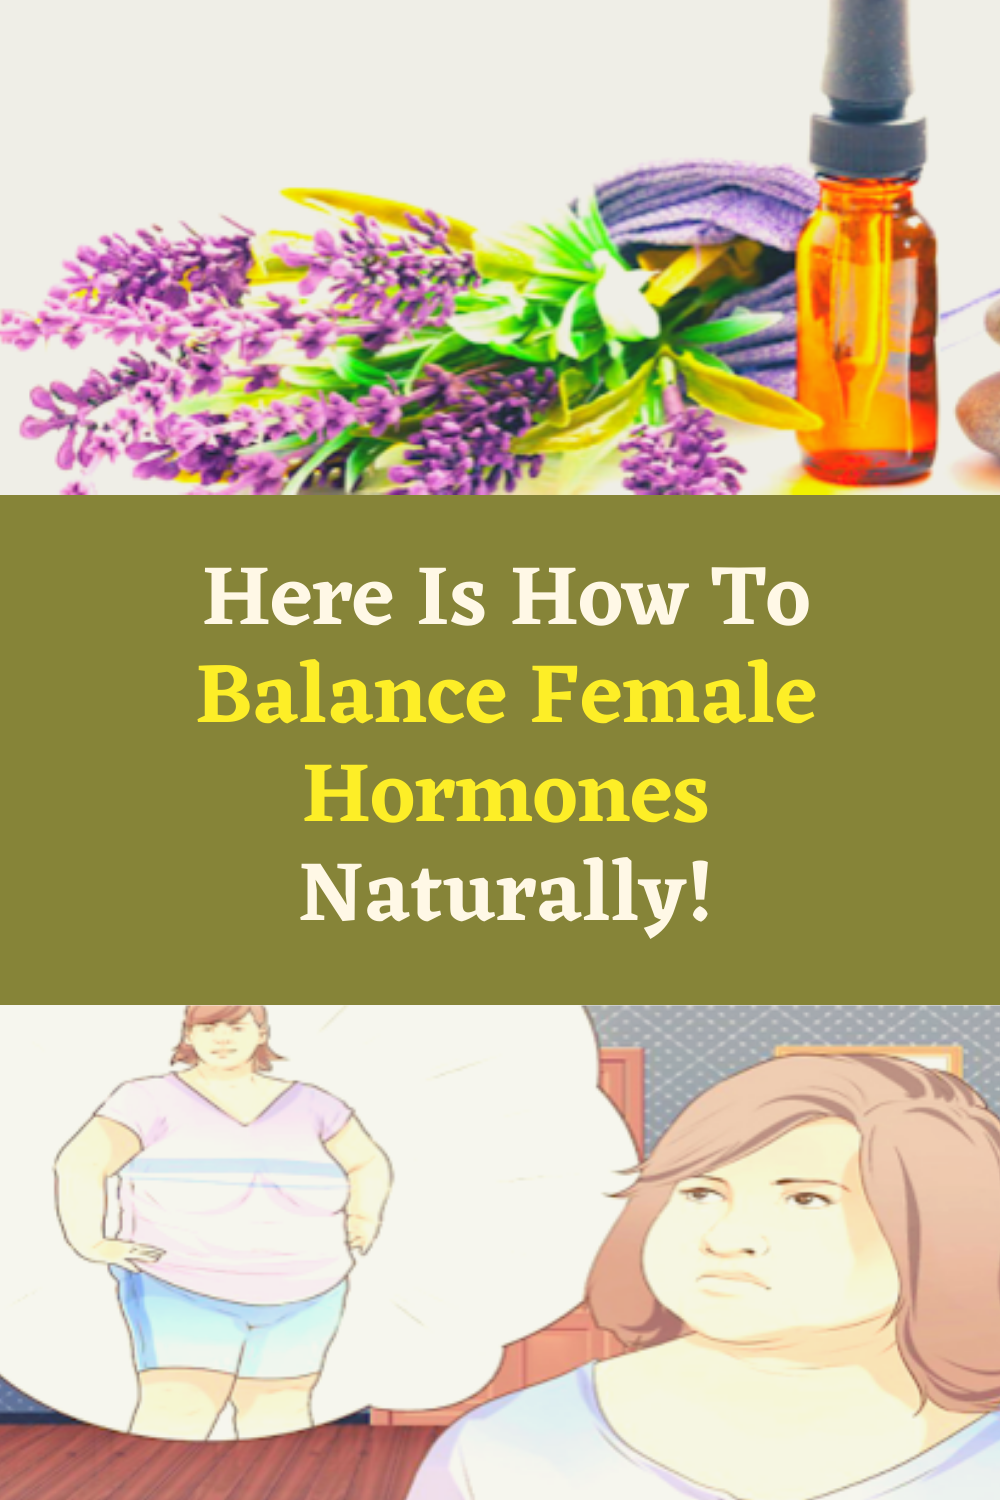 Here Is How To Balance Female Hormones Naturally!